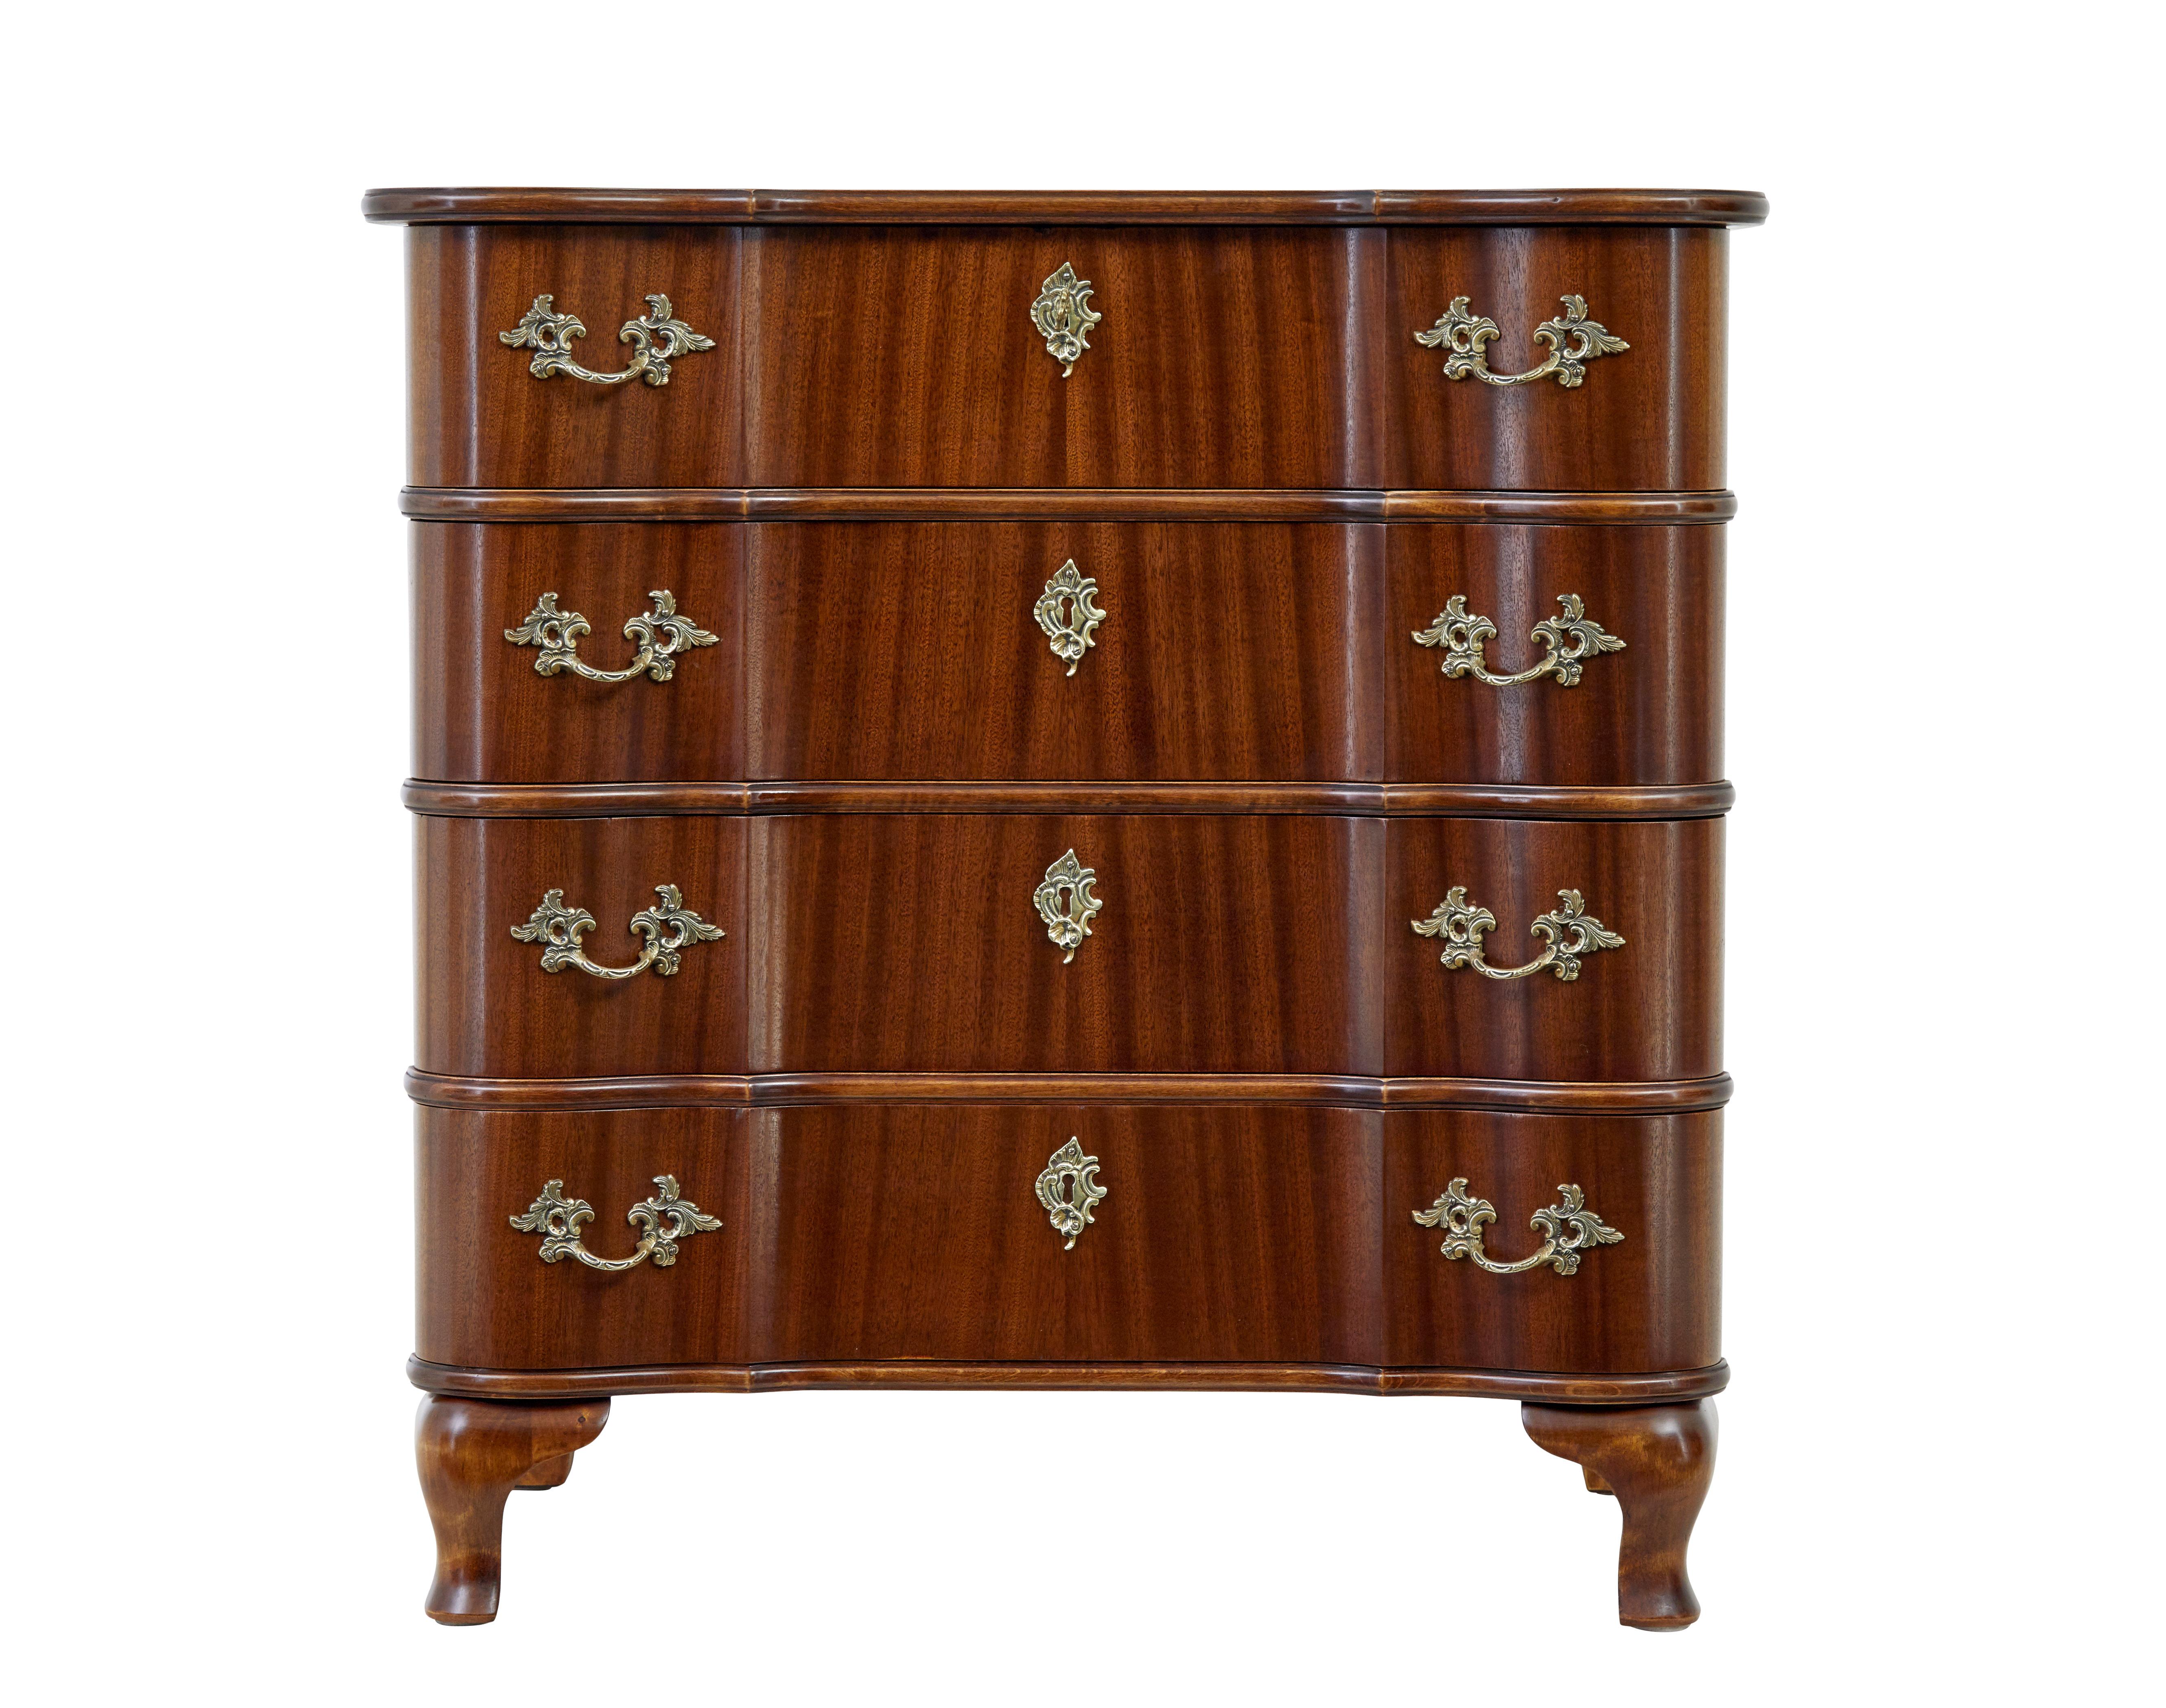 Mid 20th century mahogany baroque inspired commode circa 1950.

Danish made mahogany chest with shaped fronted drawers  very much in the baroque taste.  4 drawers with ornate brass and escutheon plates.  Standing on shaped ogee feet.

Recently